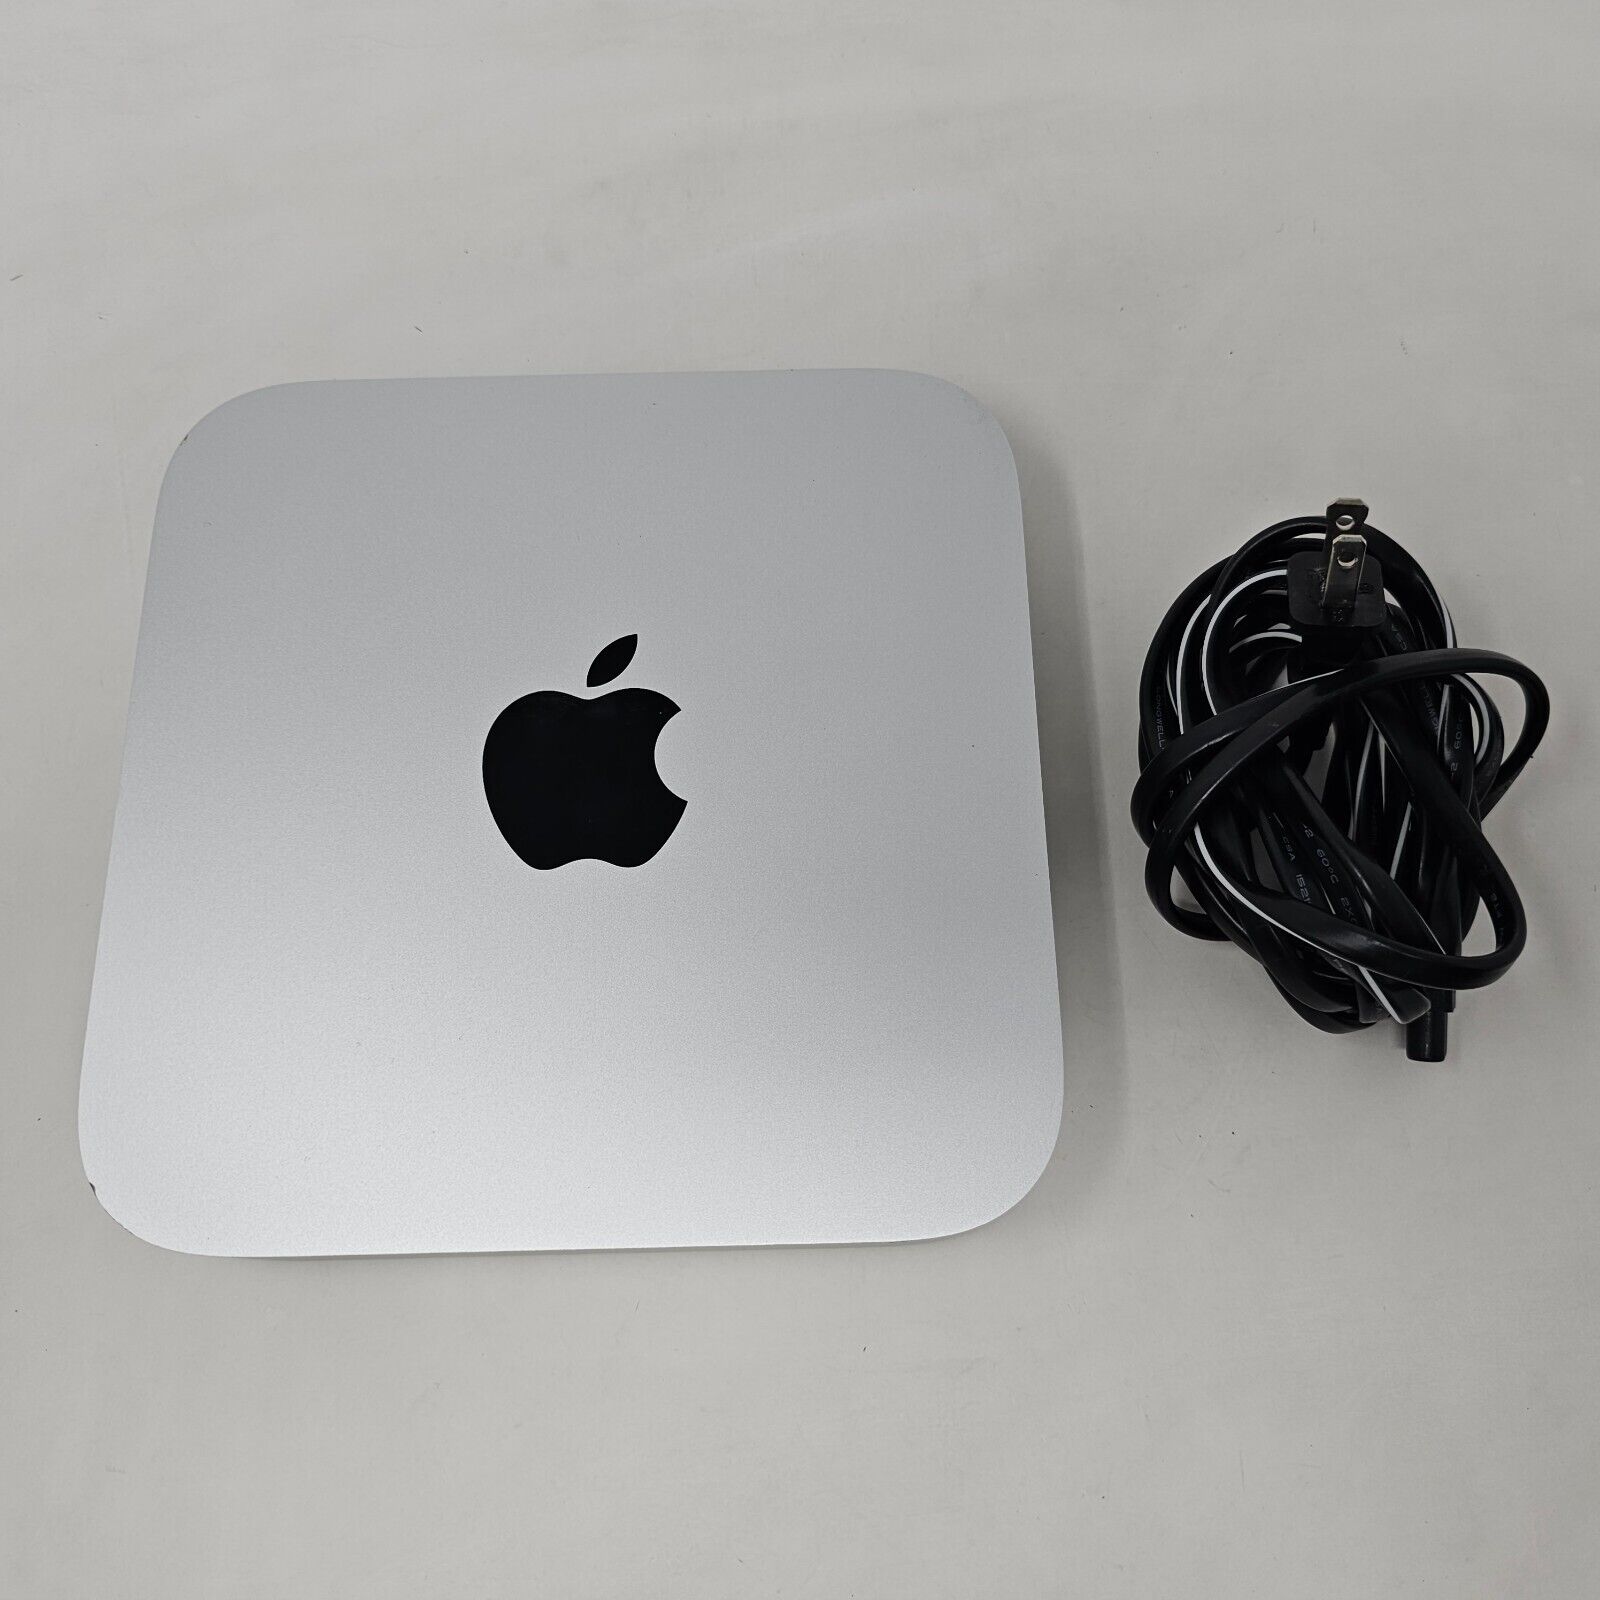 APPLE MAC MINI A1347 MID-2011 I5 2.3GHZ 4GB/500GB TESTED GREAT FOR RETRO GAMING